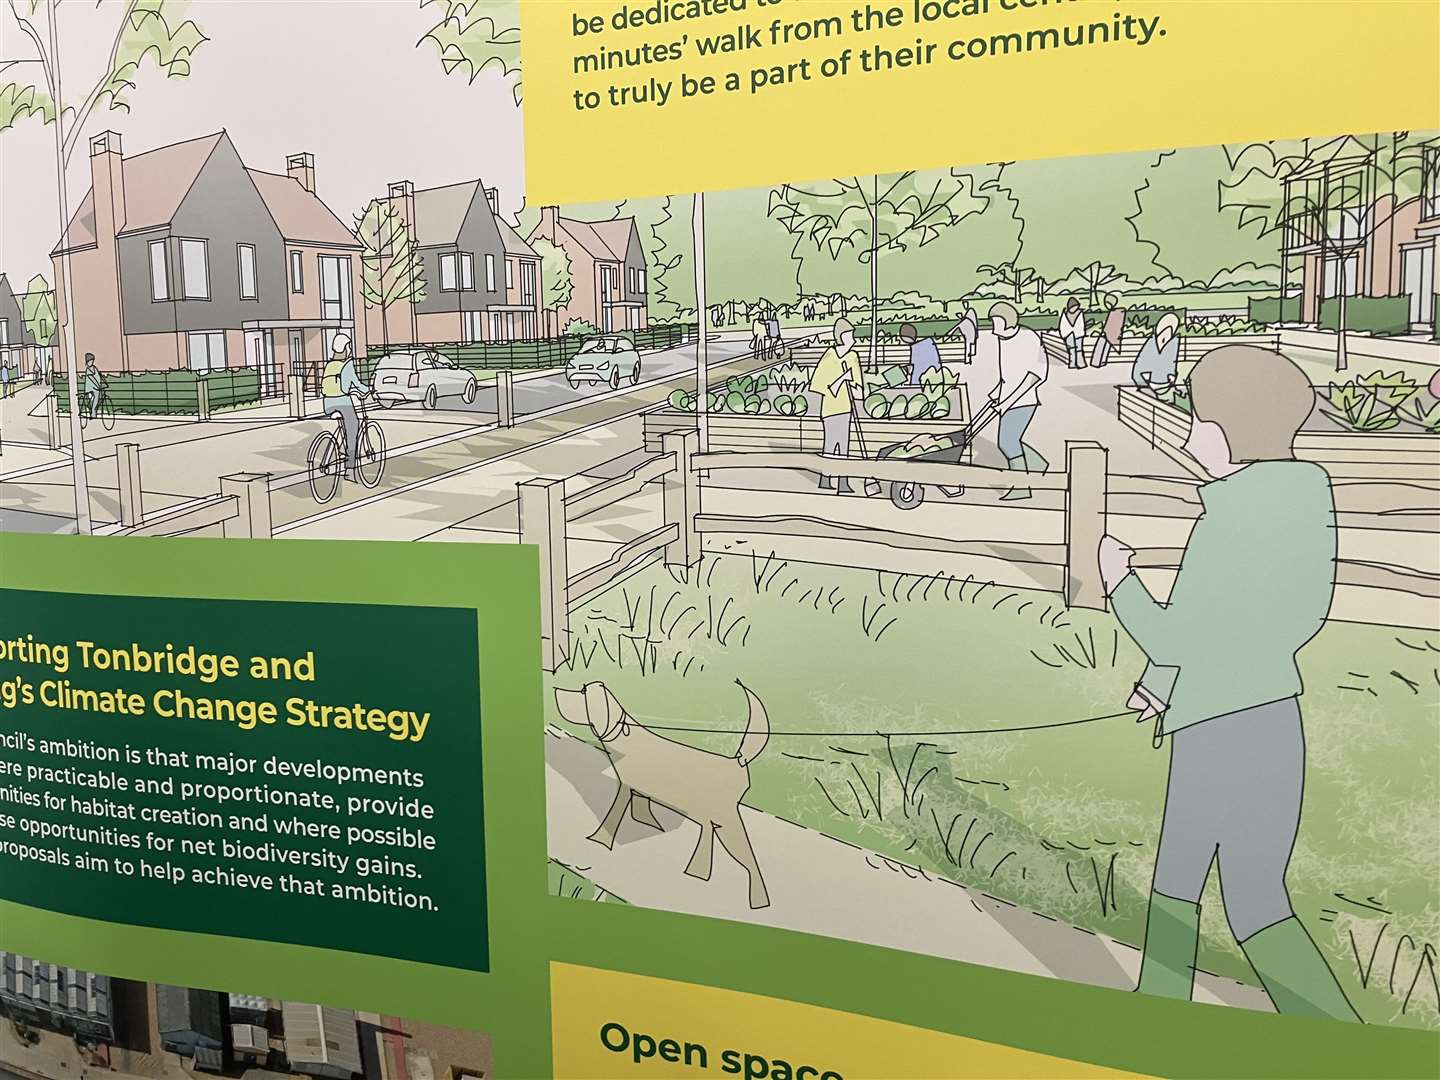 Display boards portray and idyllic vision of life on the planned estate, but many were not convinced